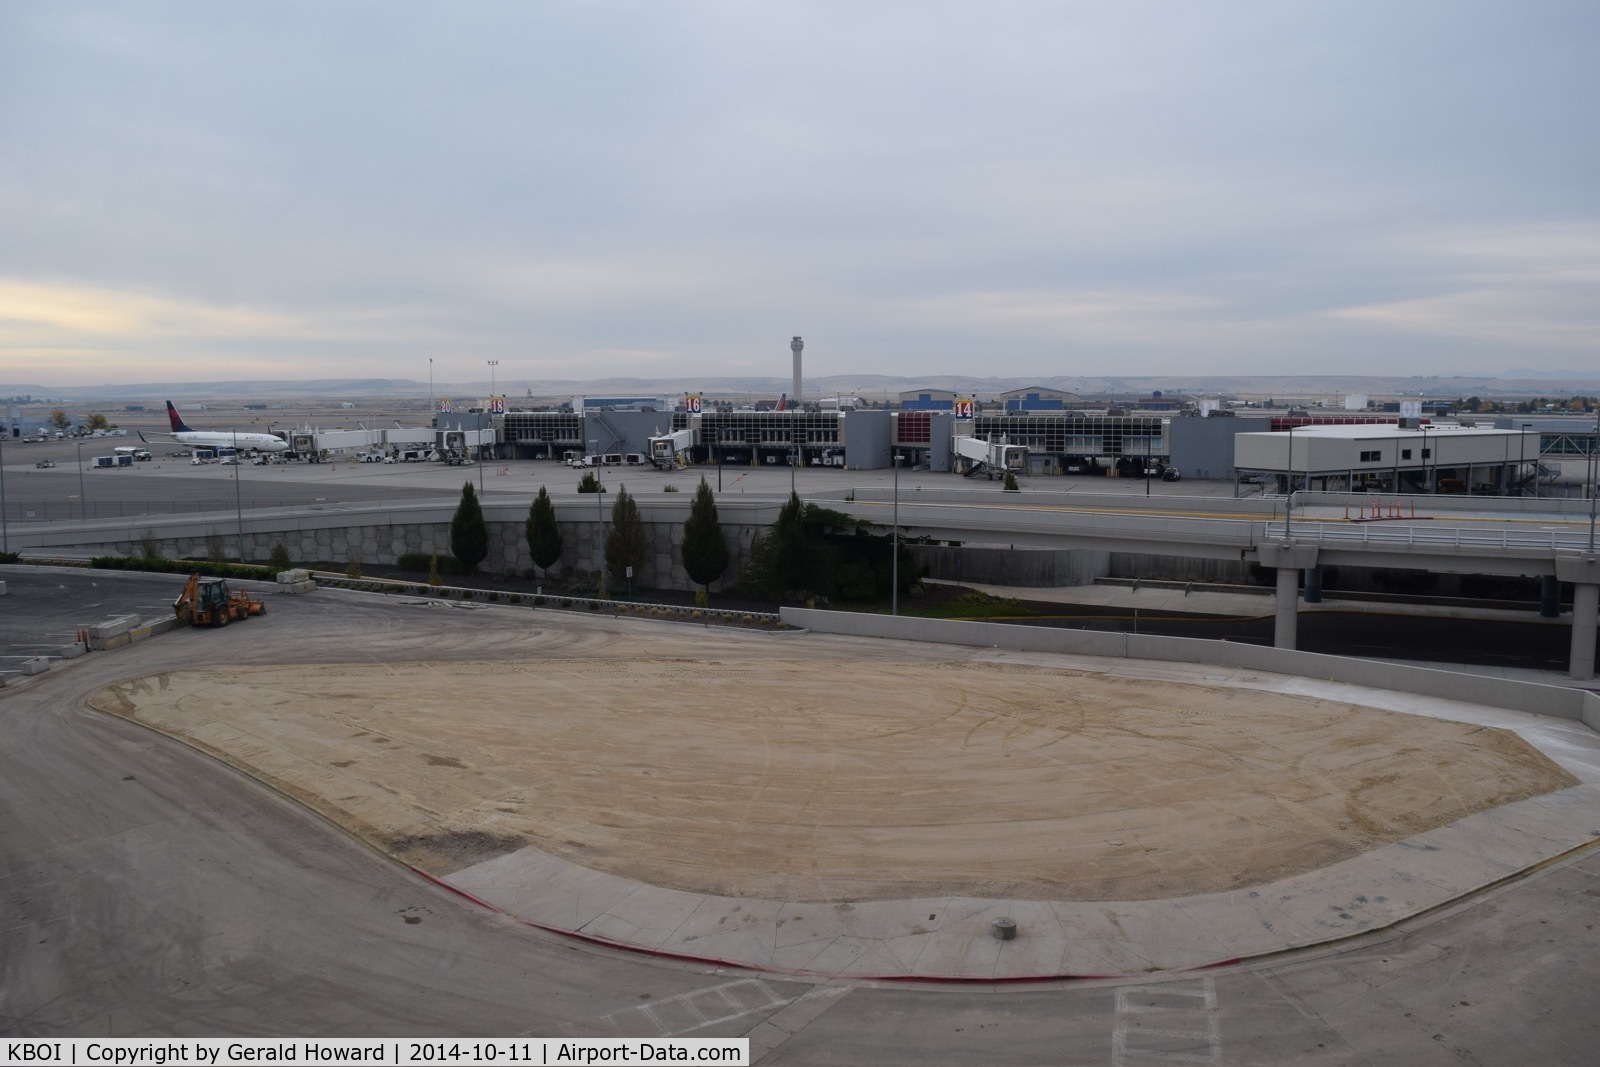 Boise Air Terminal/gowen Fld Airport (BOI) - Finished removal of old tower. New tower is visible in the distance.